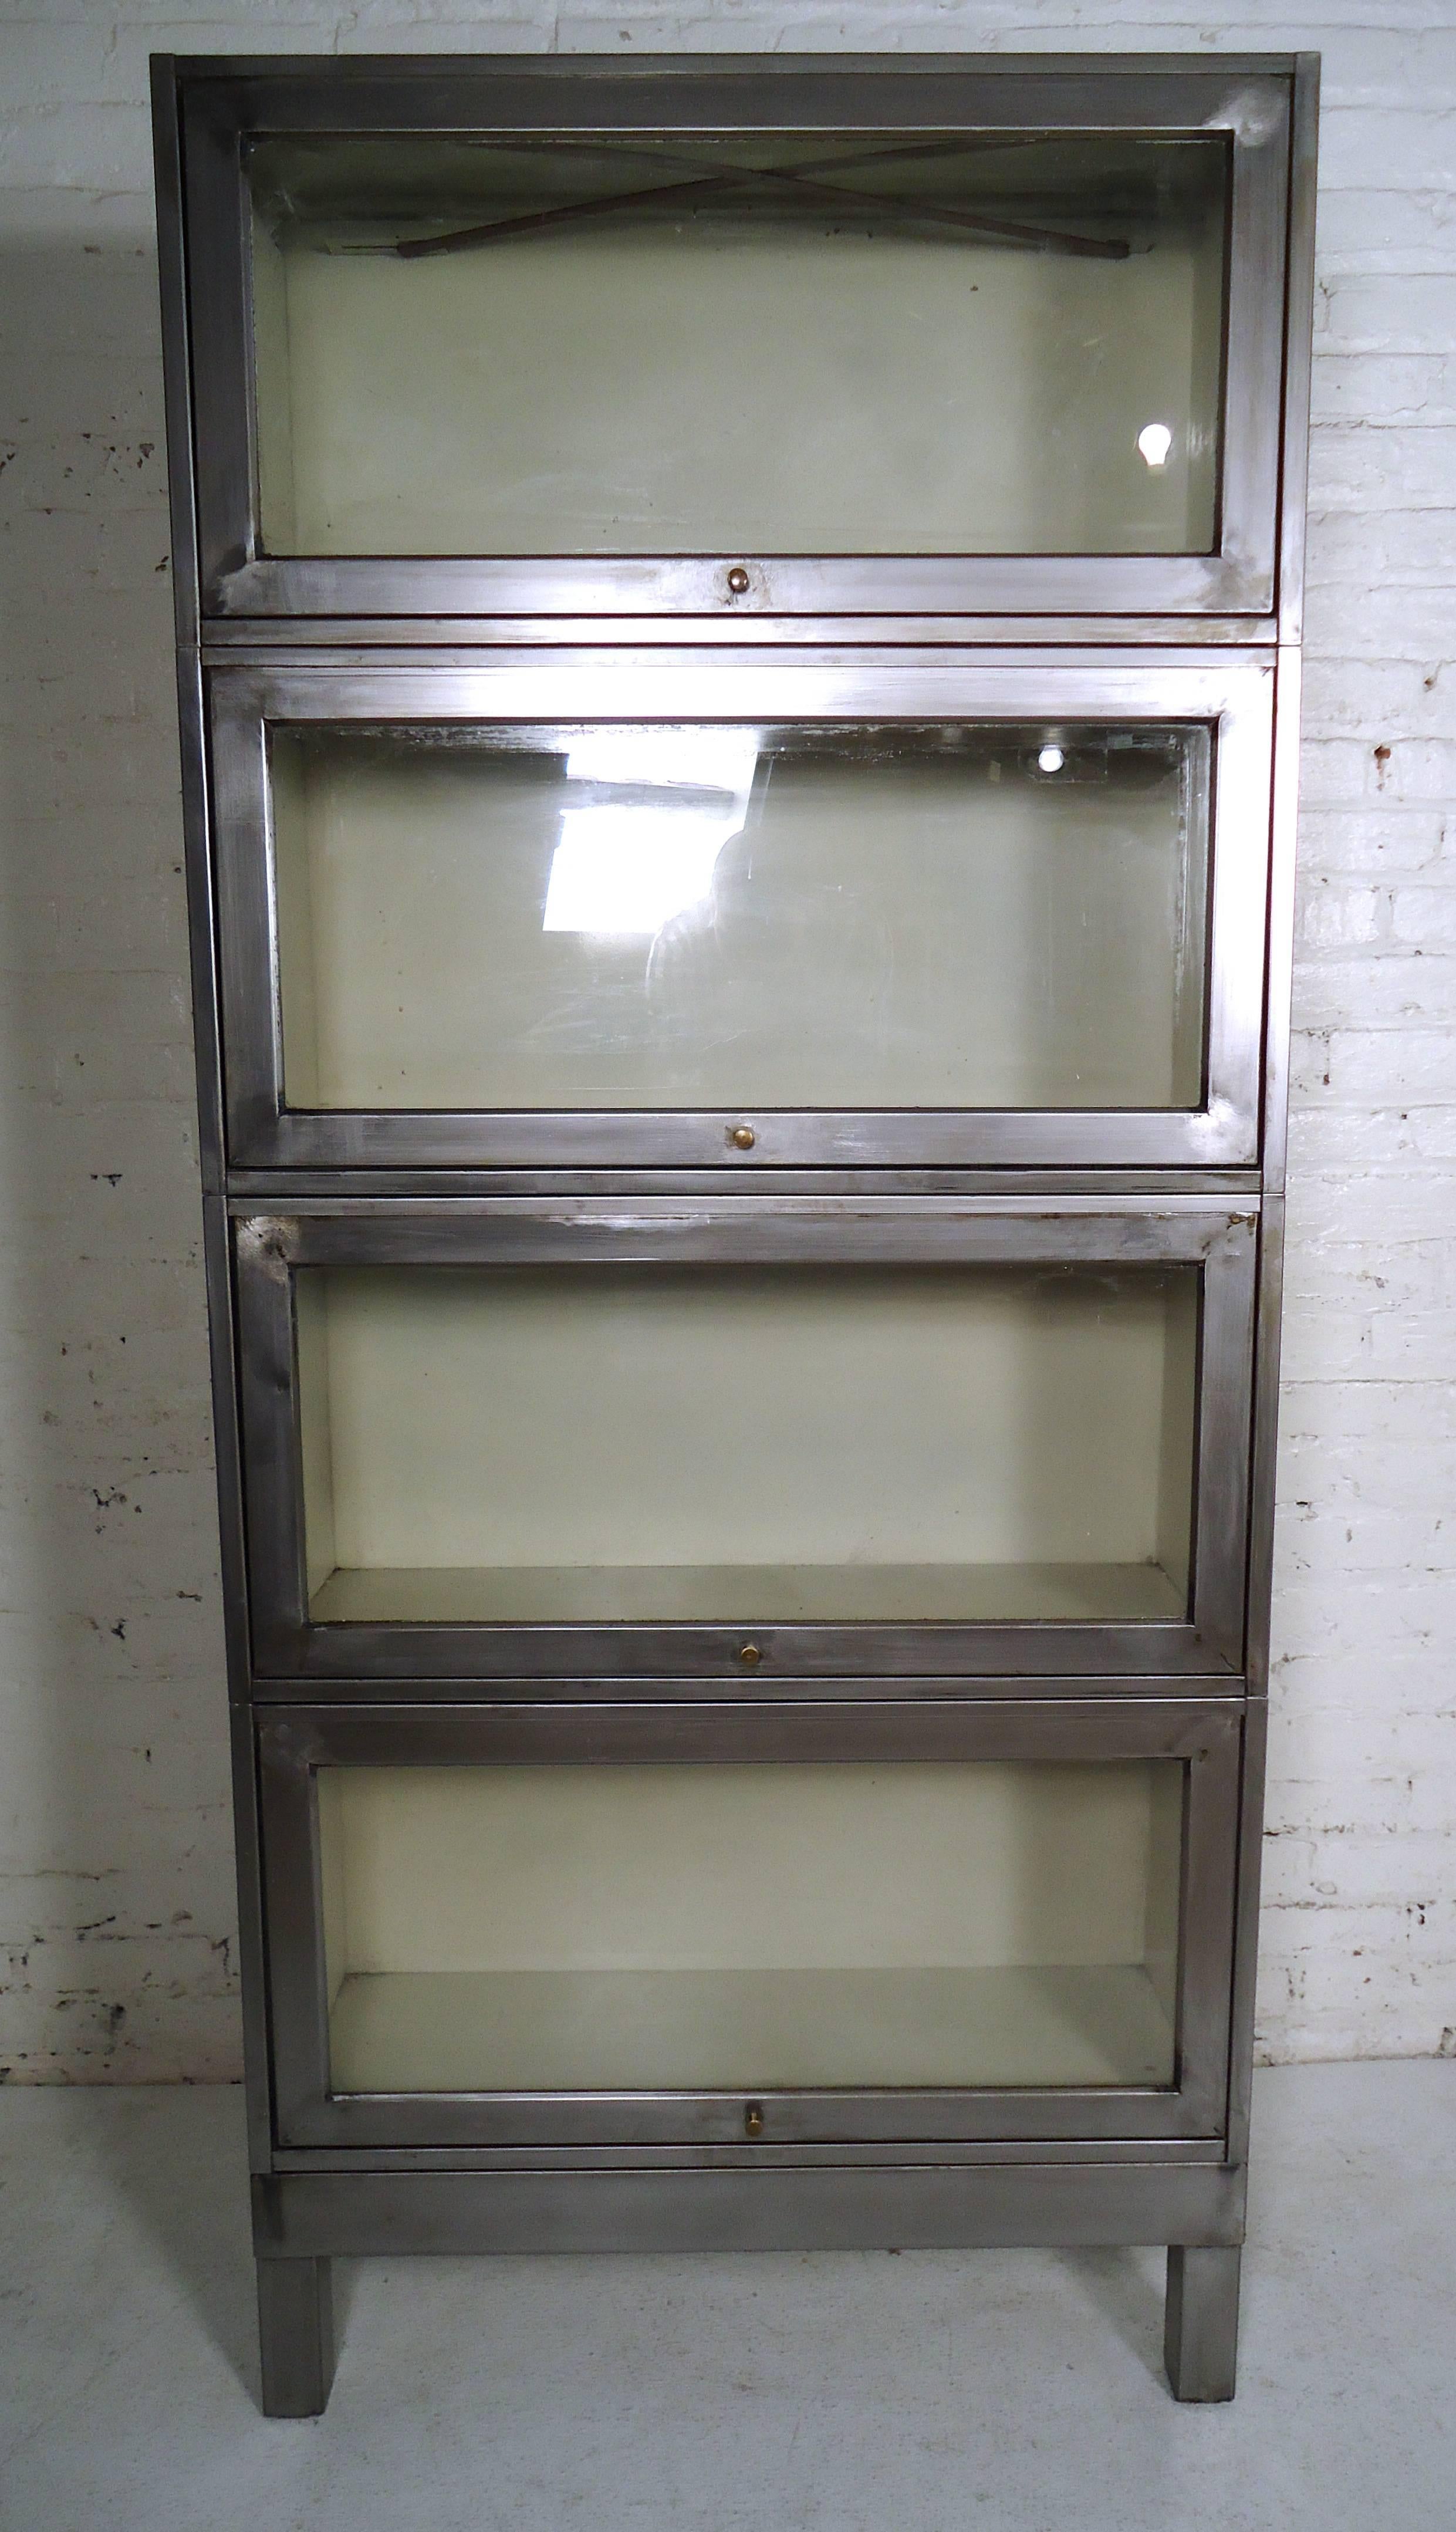 Vintage industrial metal four-stack bookcase features a glass front, round metal knobs and a sturdy metal detachable base.

Please confirm item location (NY or NJ).